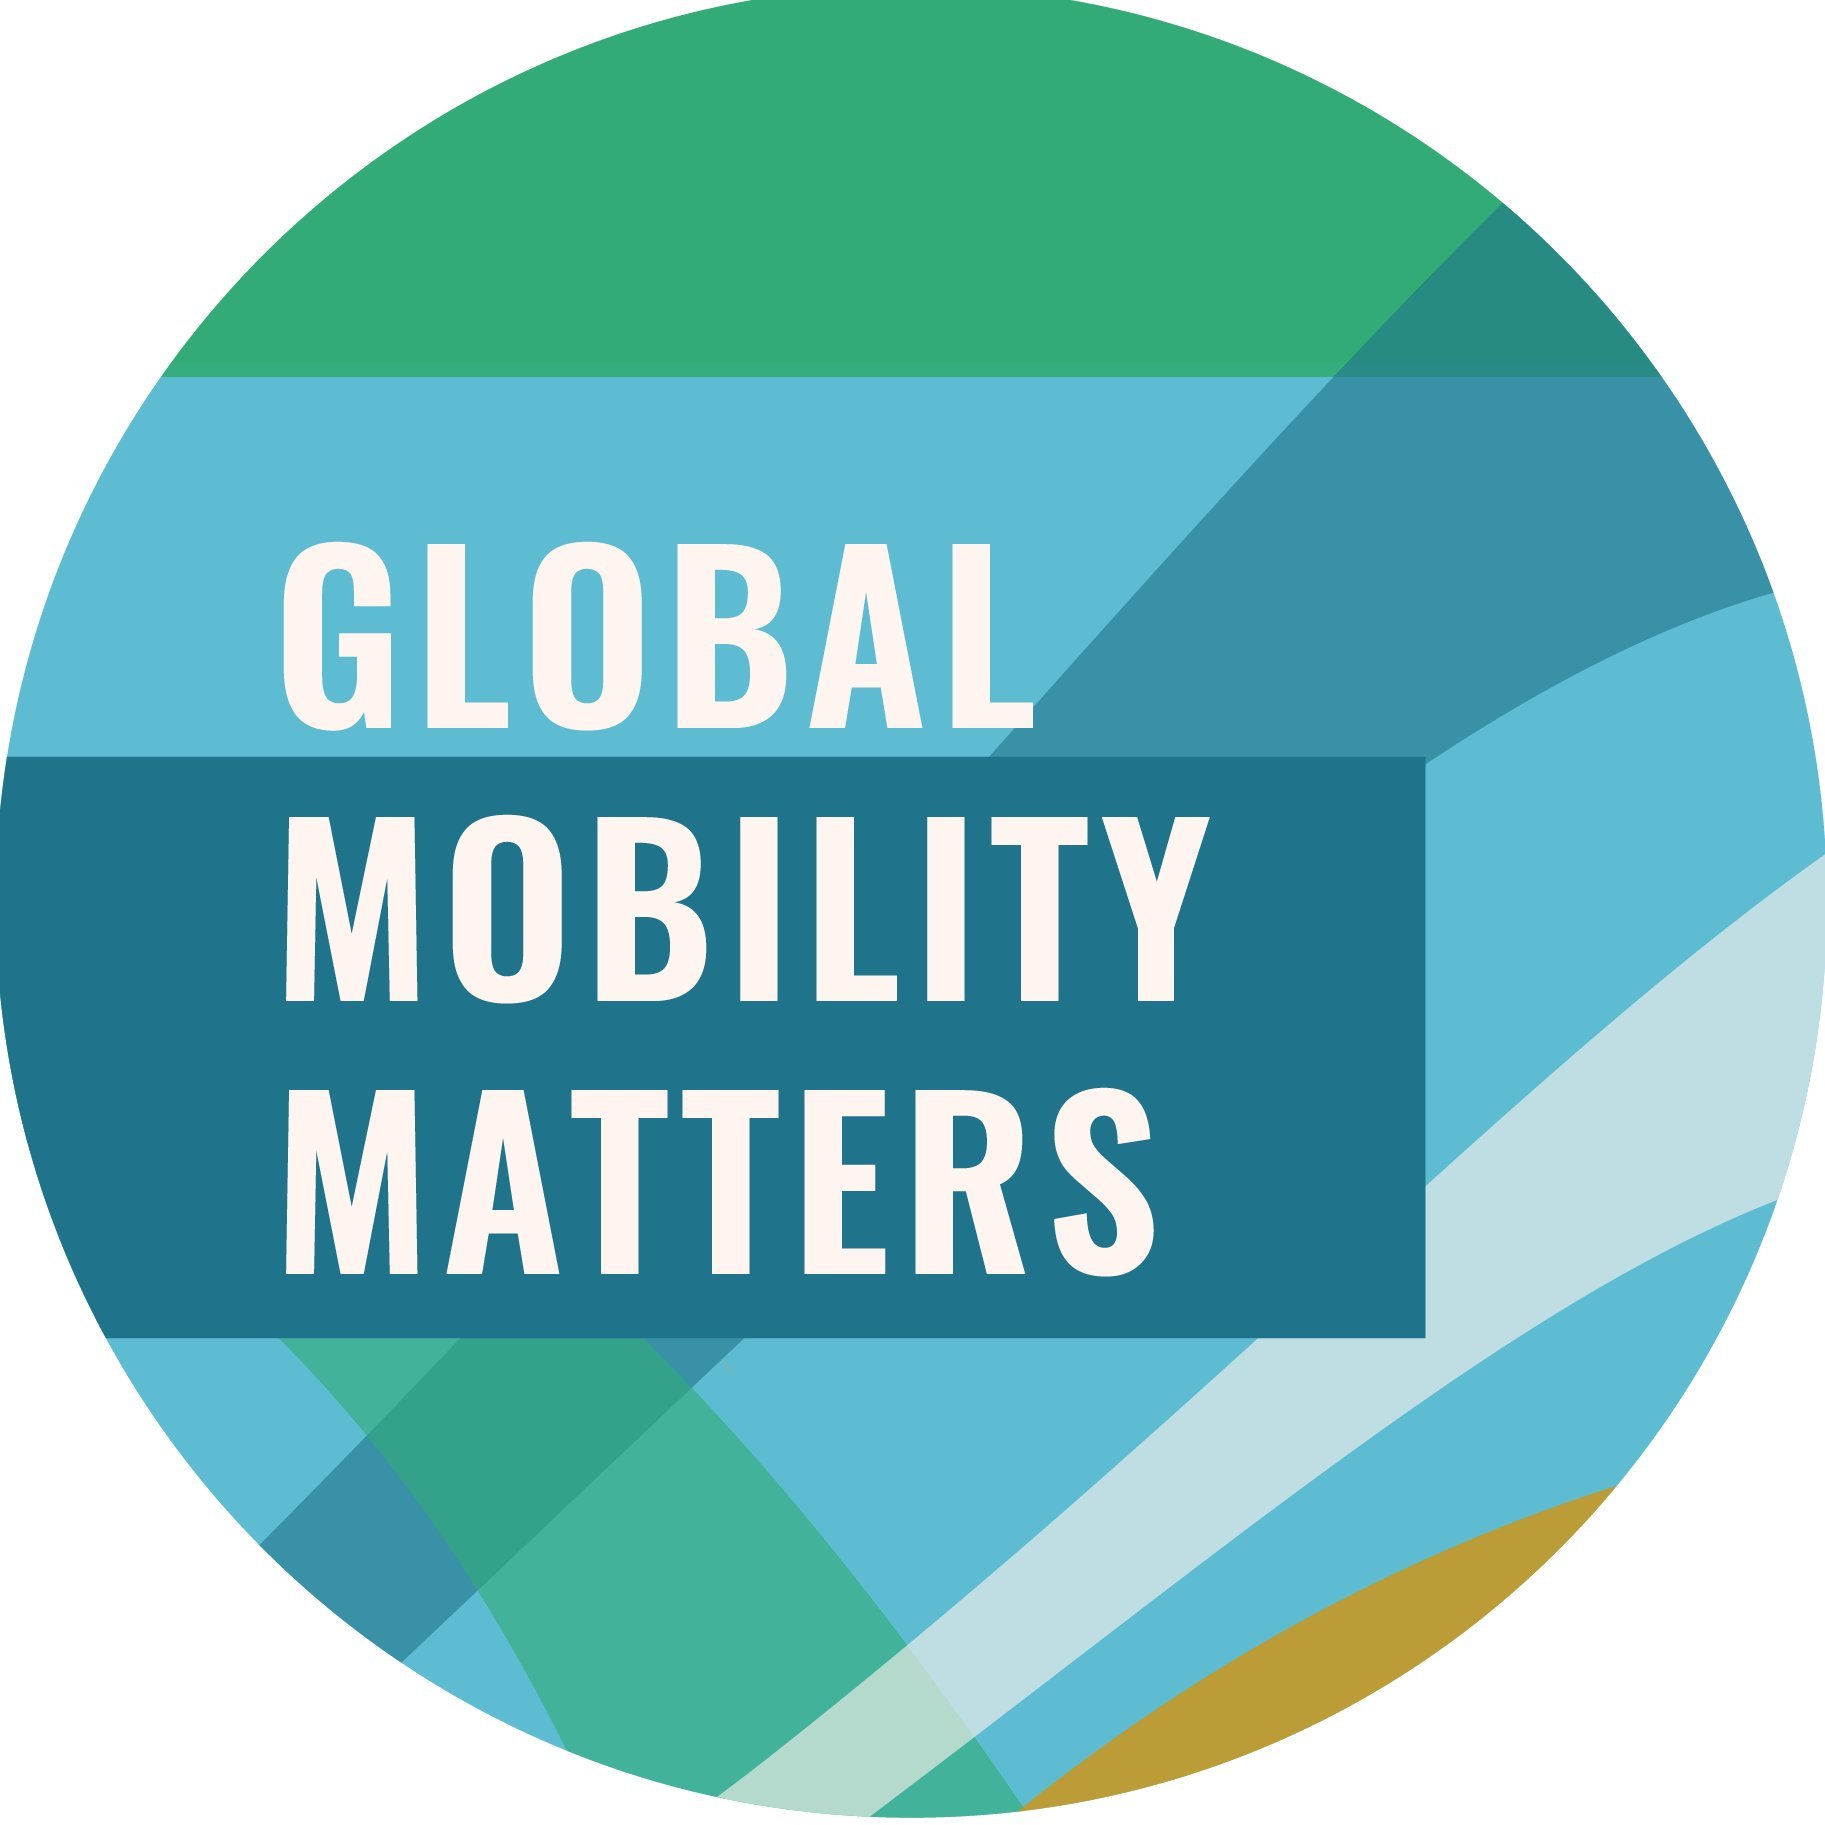 Stories from a world in motion – how do you get around? | pitches to submissions@globalmomatters.com